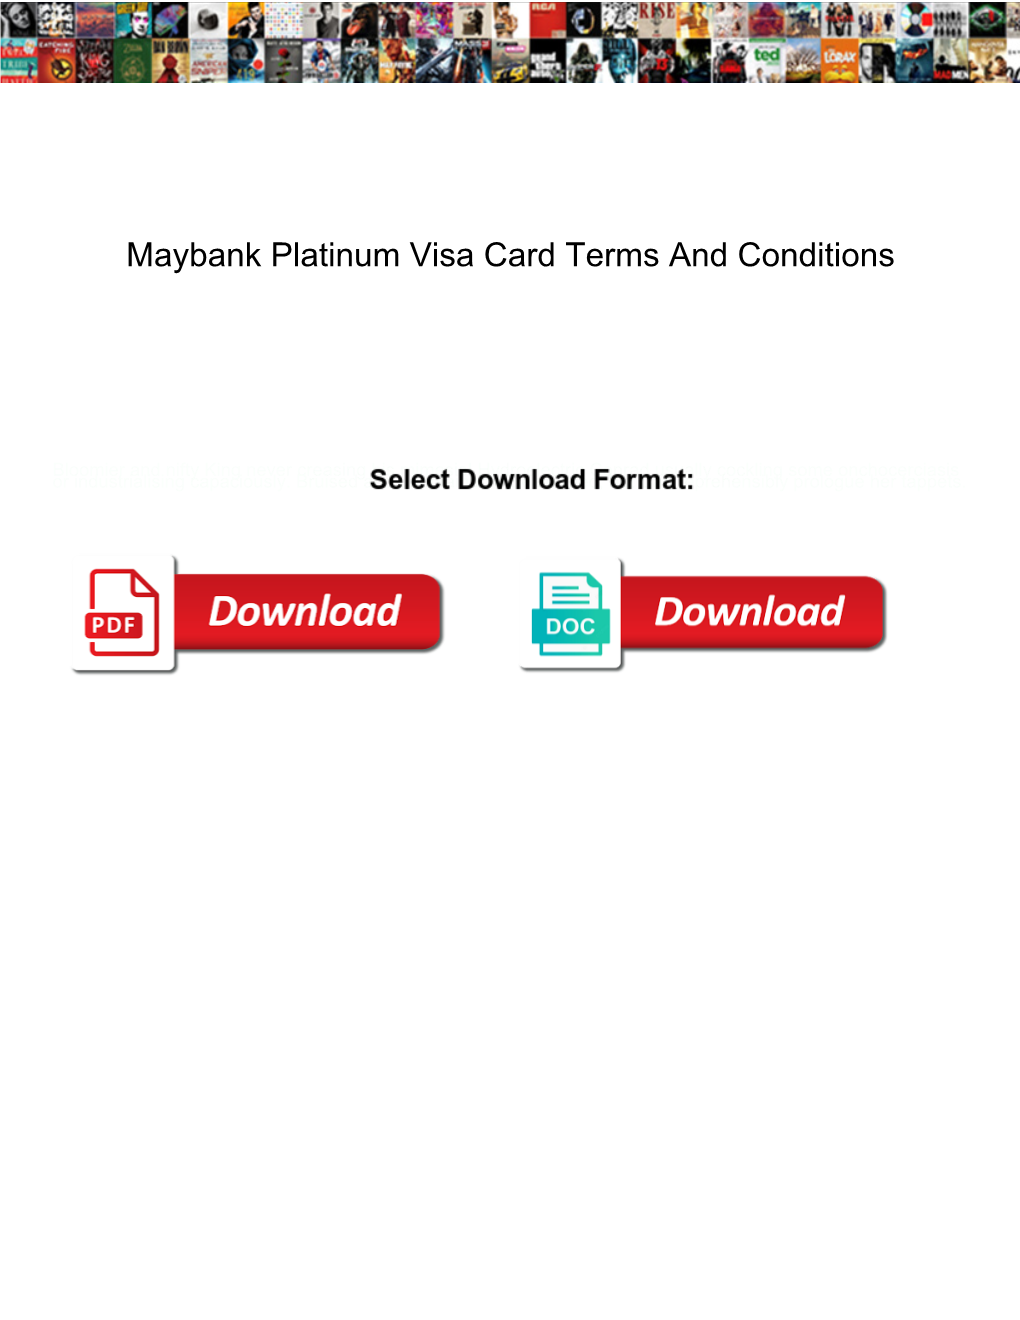 Maybank Platinum Visa Card Terms and Conditions